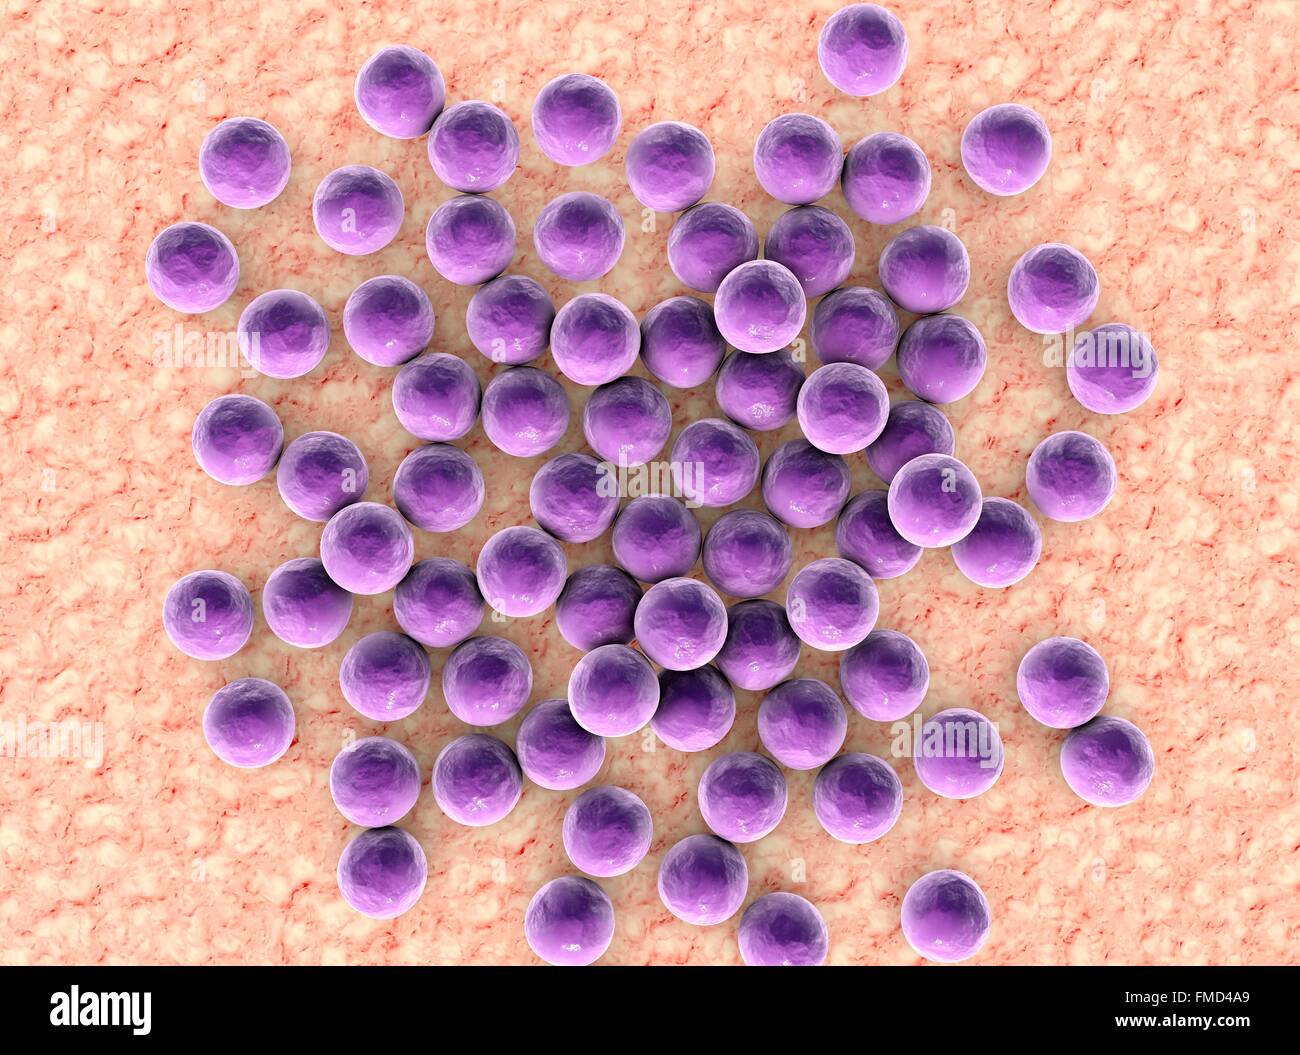 Pictures Of The Bacteria Staphylococcus Aureus 71